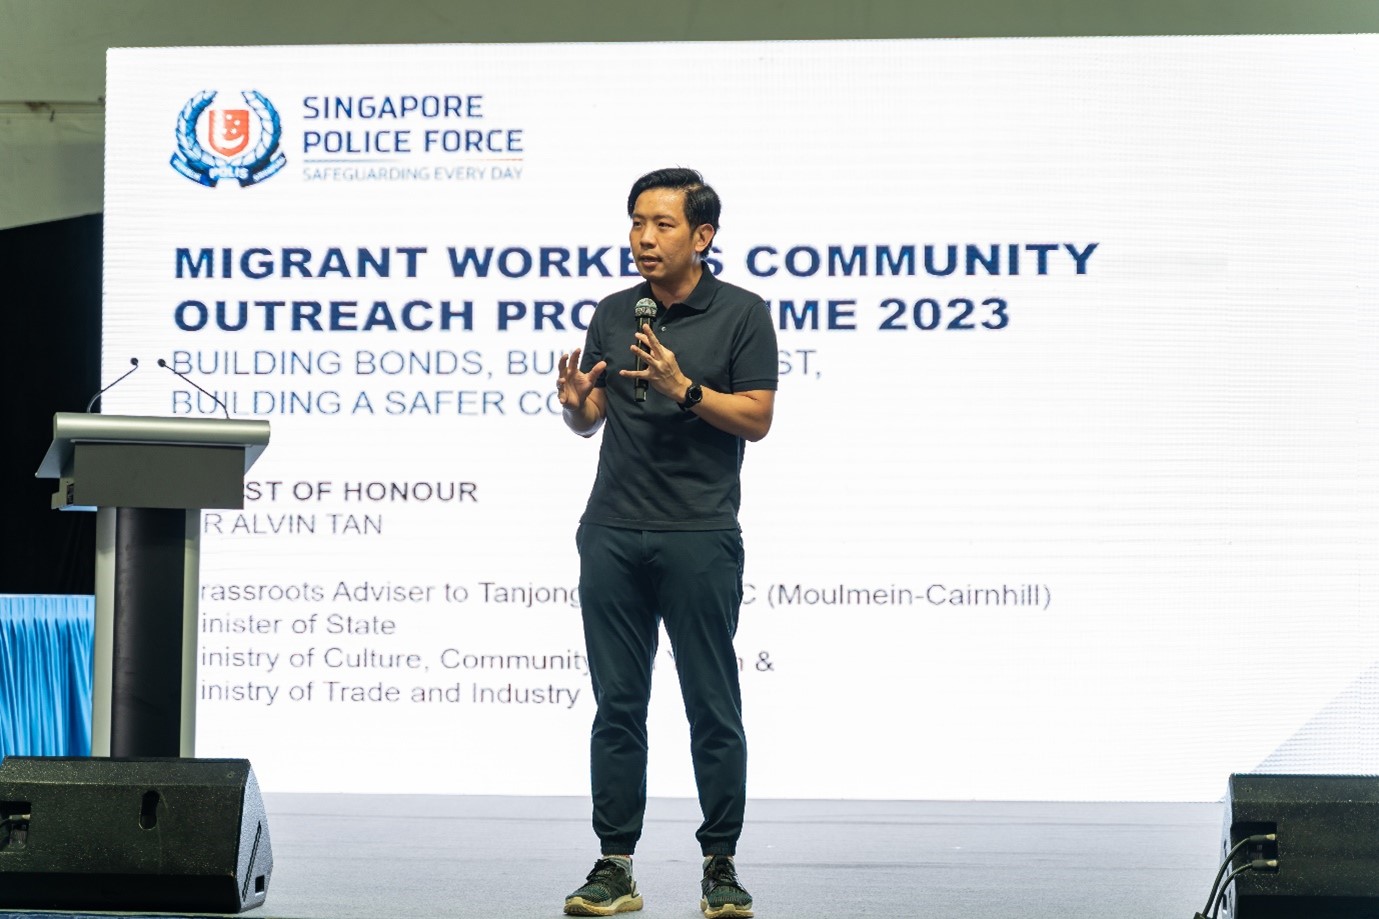 20231126_migrant_workers_community_outreach_programme_mw_cop_1